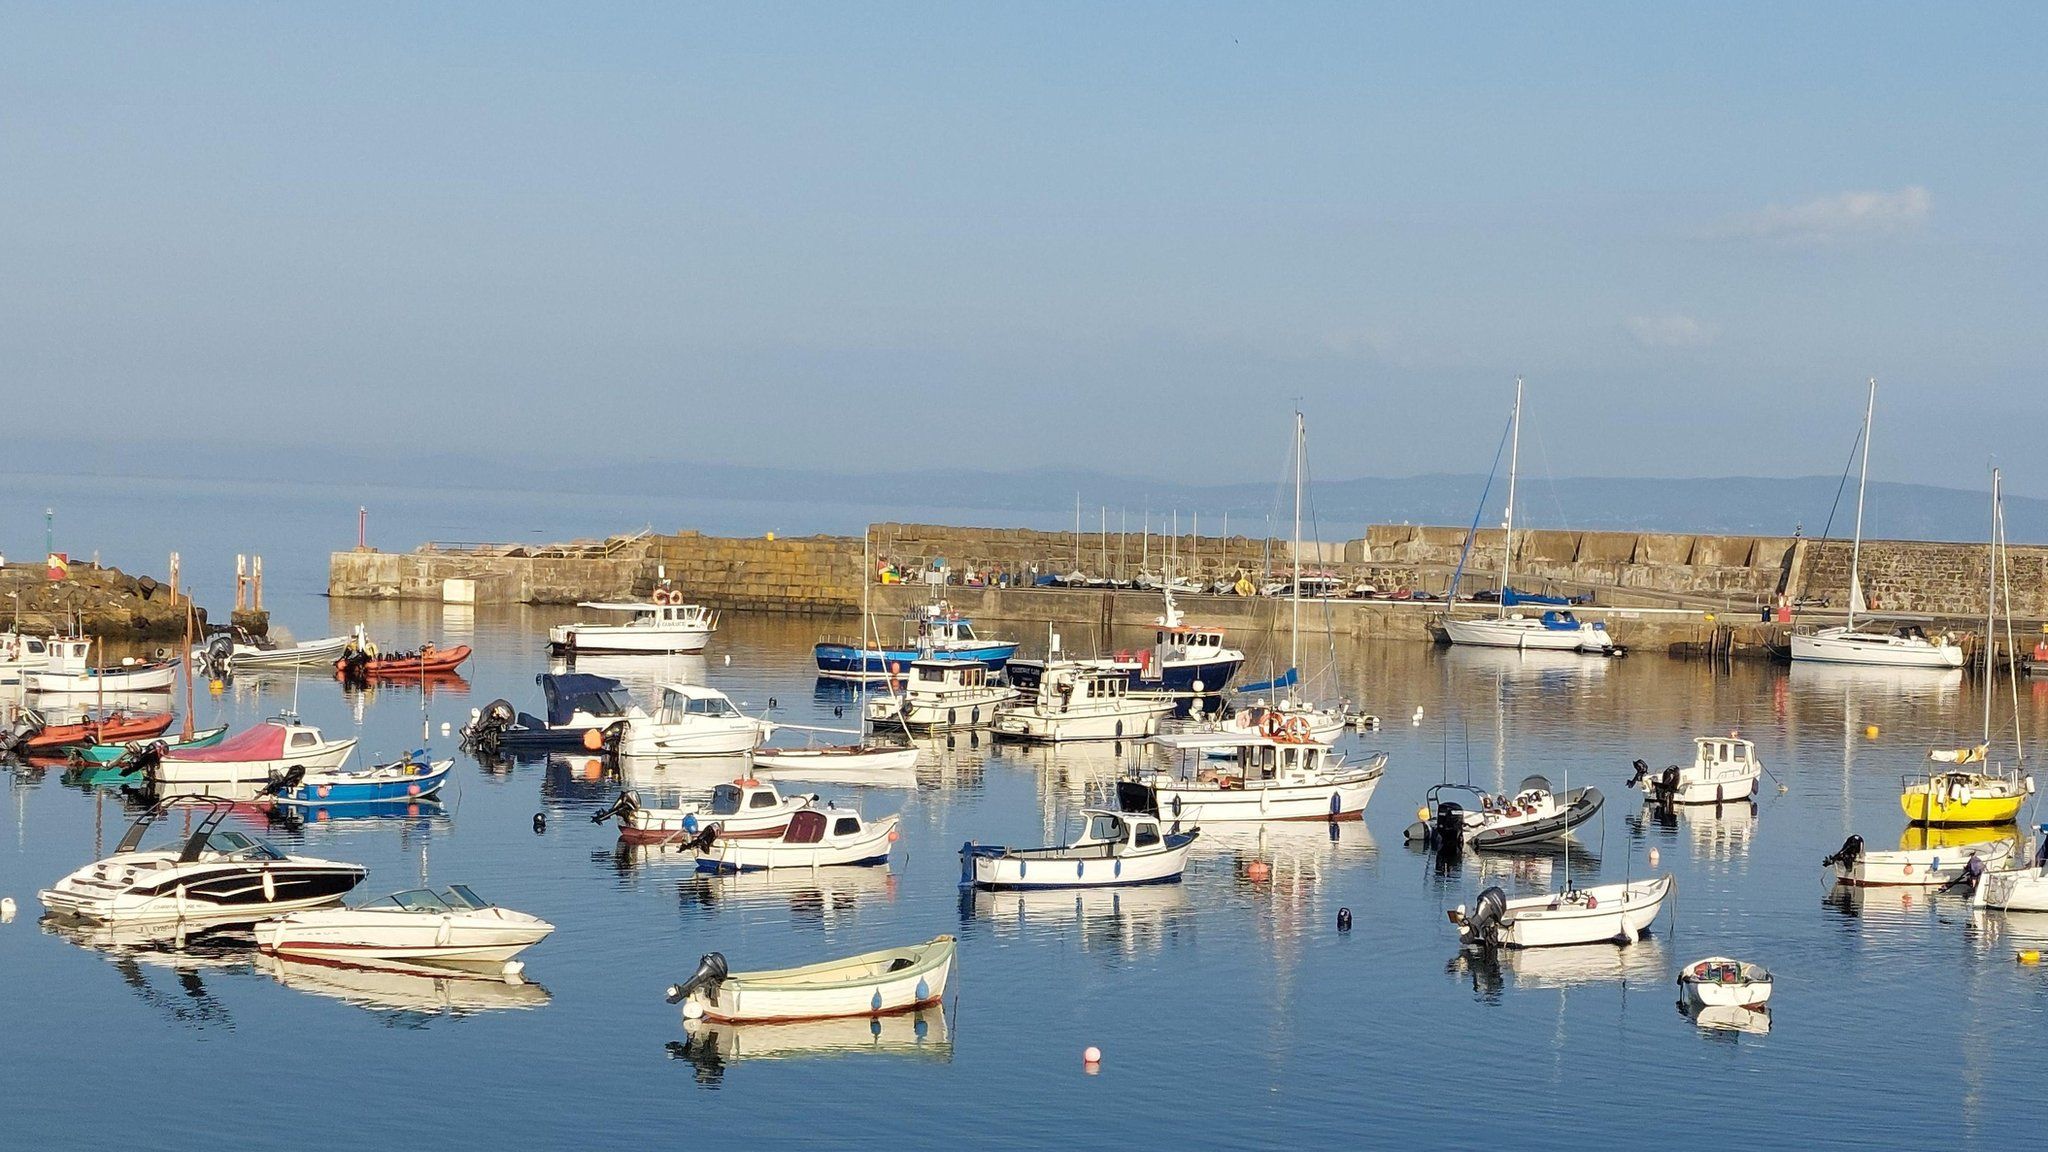 Boats docked at harbour in Portrush.